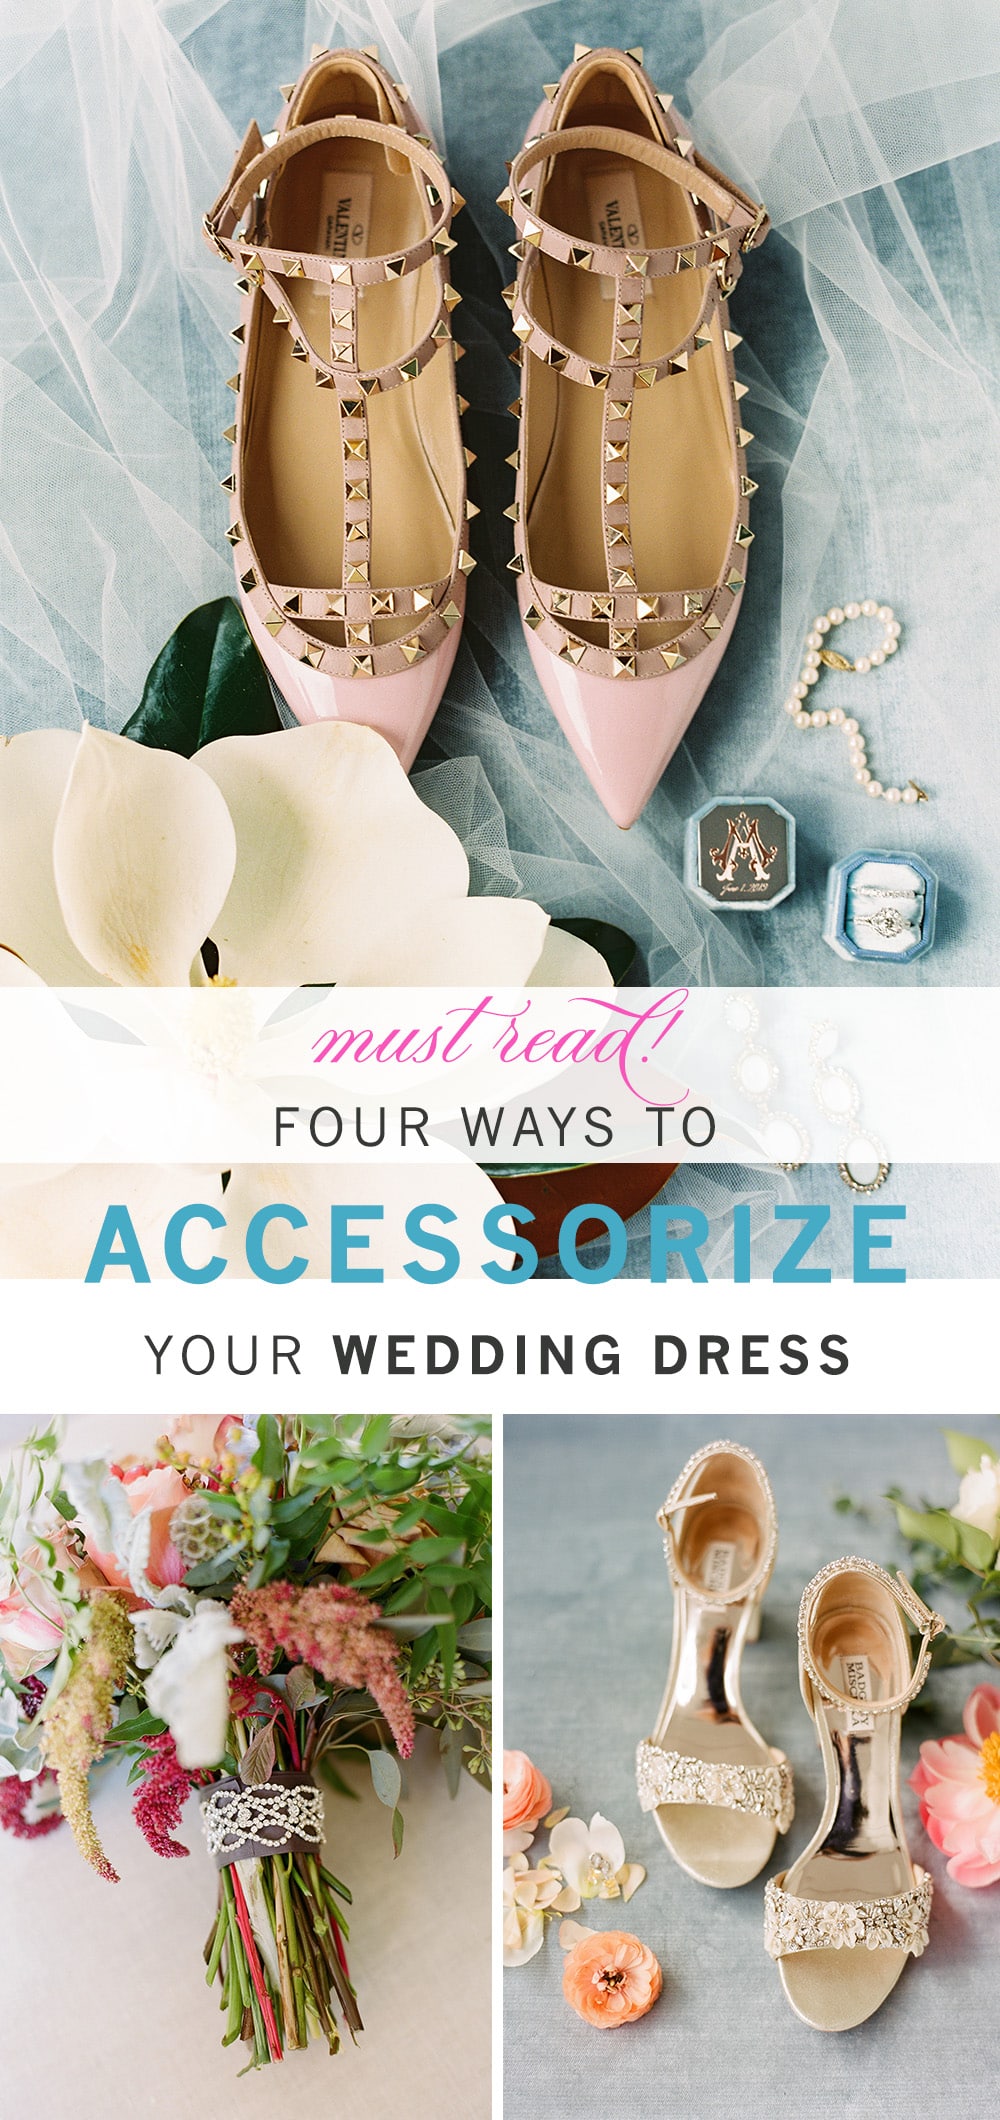 Four Ways to Accessorize Your Wedding Dress - Wine and Country Weddings